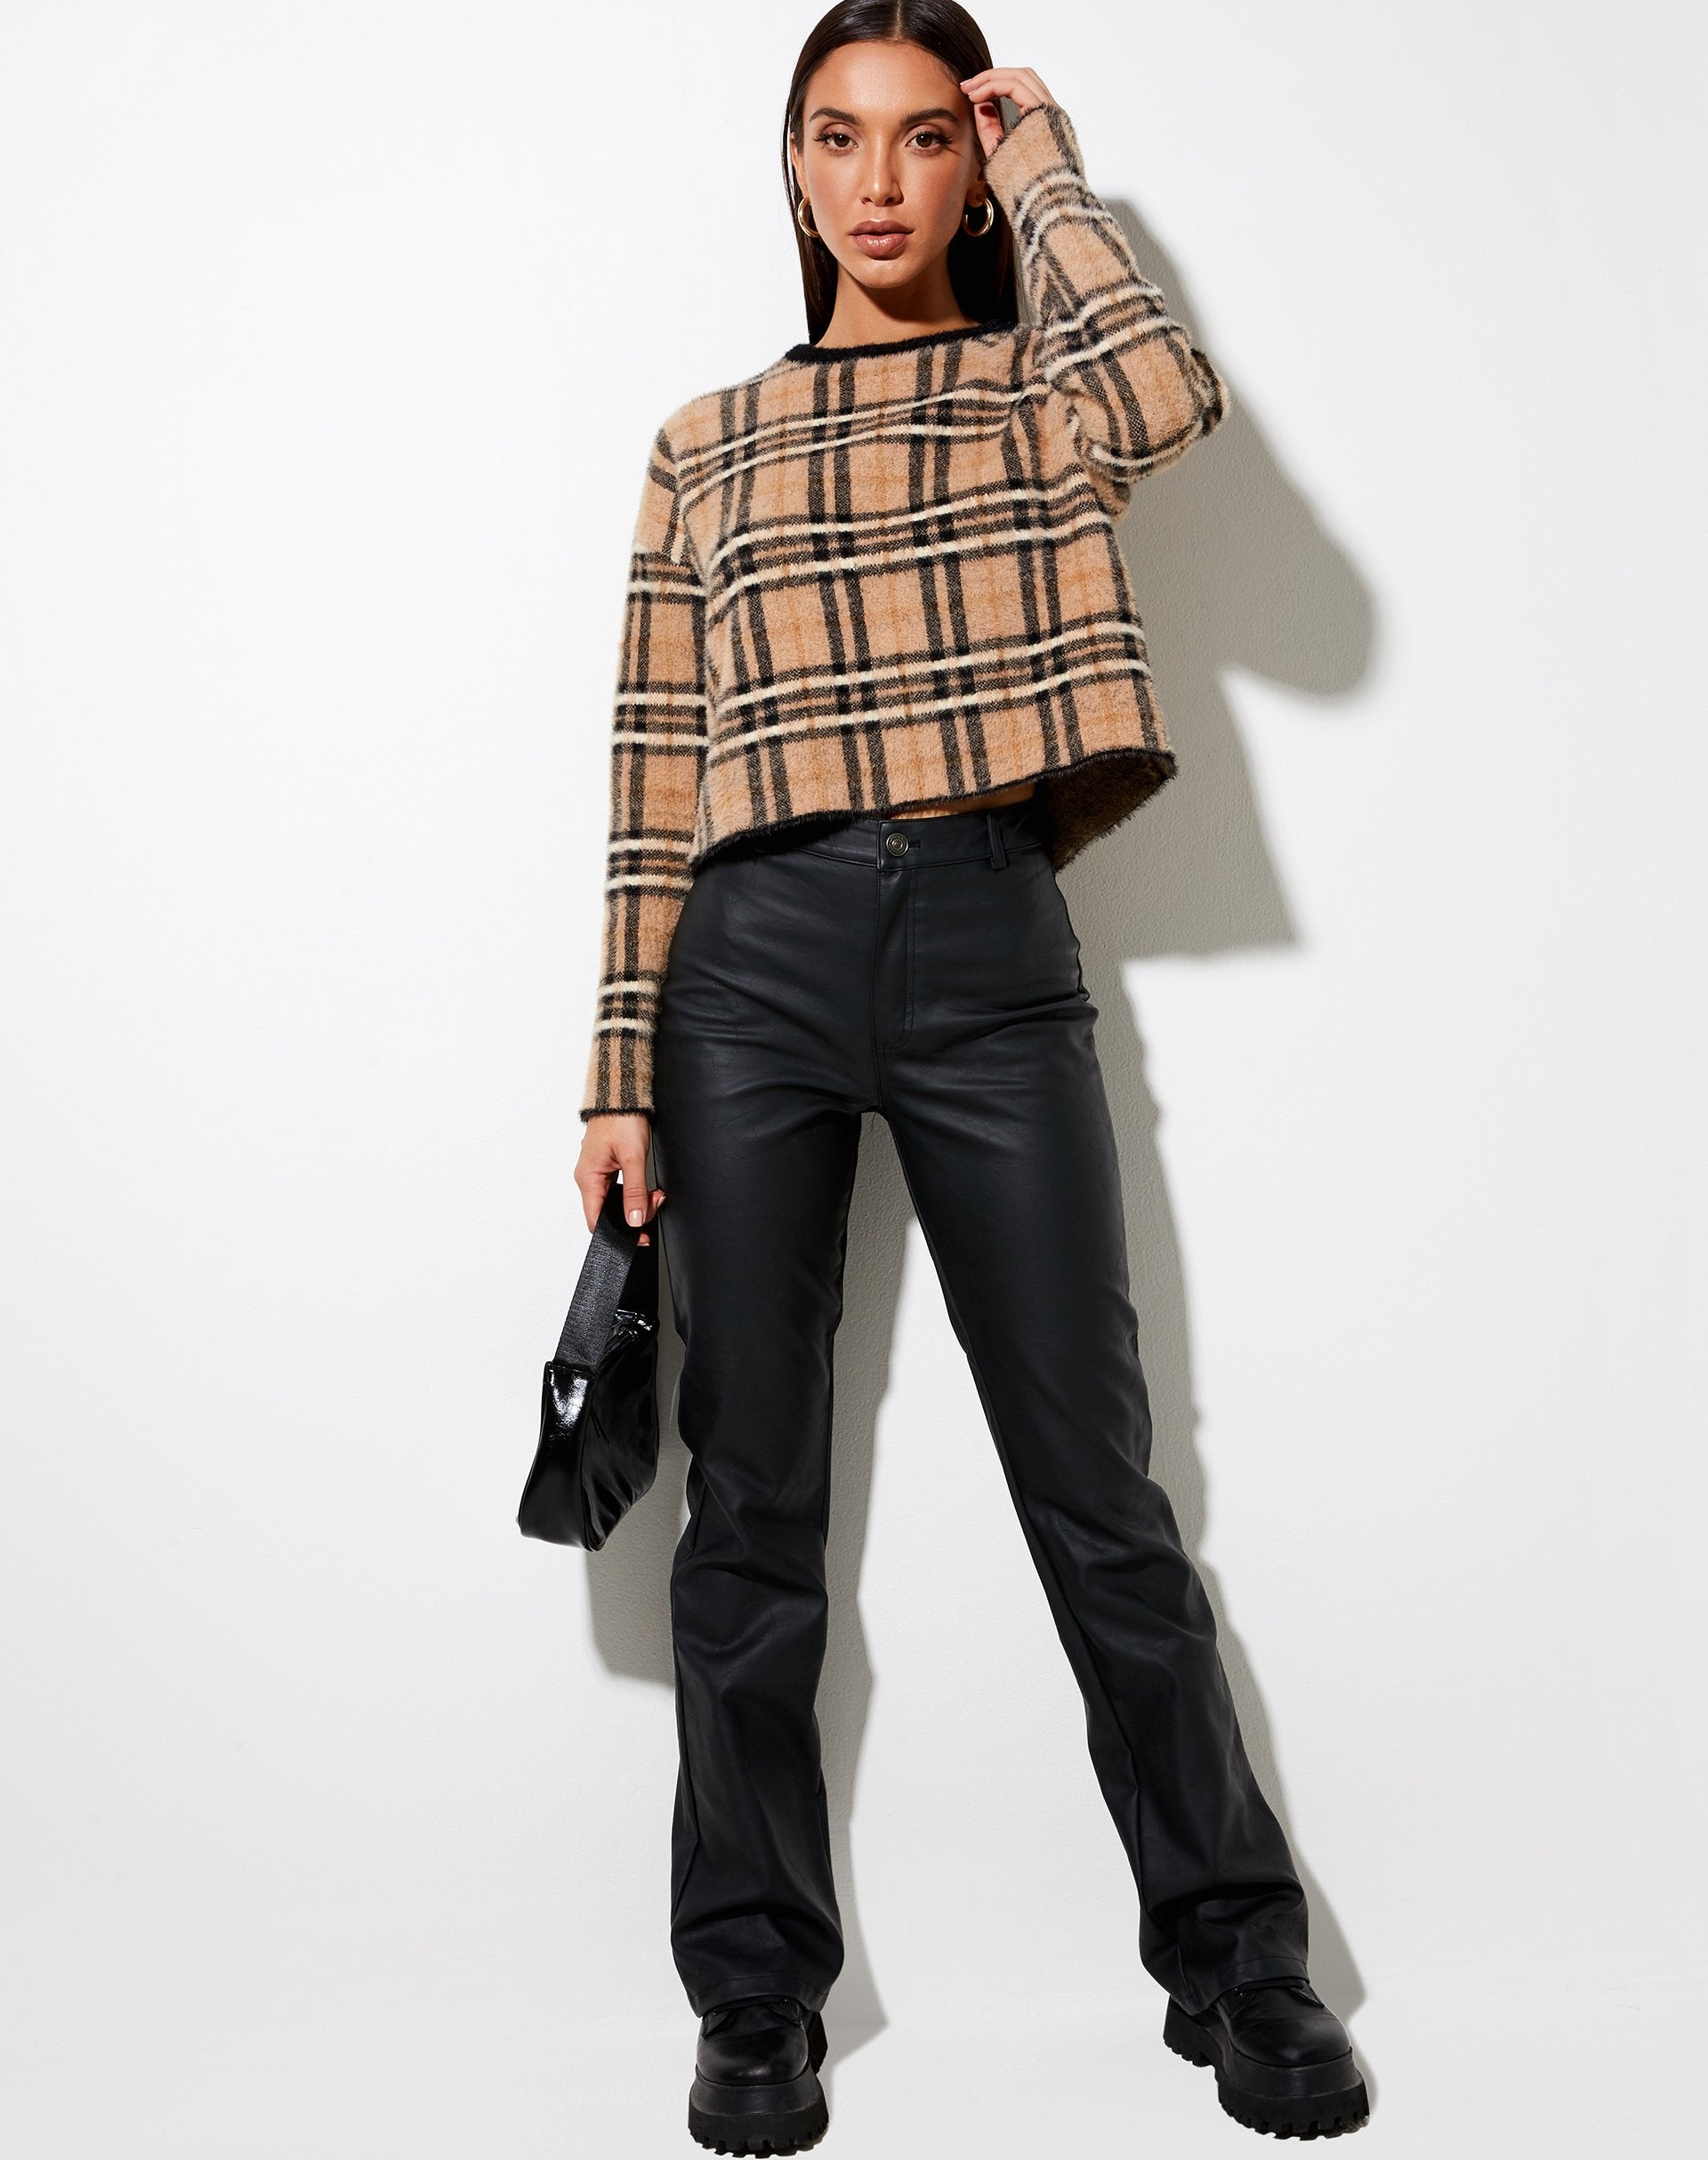 Image of Oki Jumper in Knit Cream Black and White Check